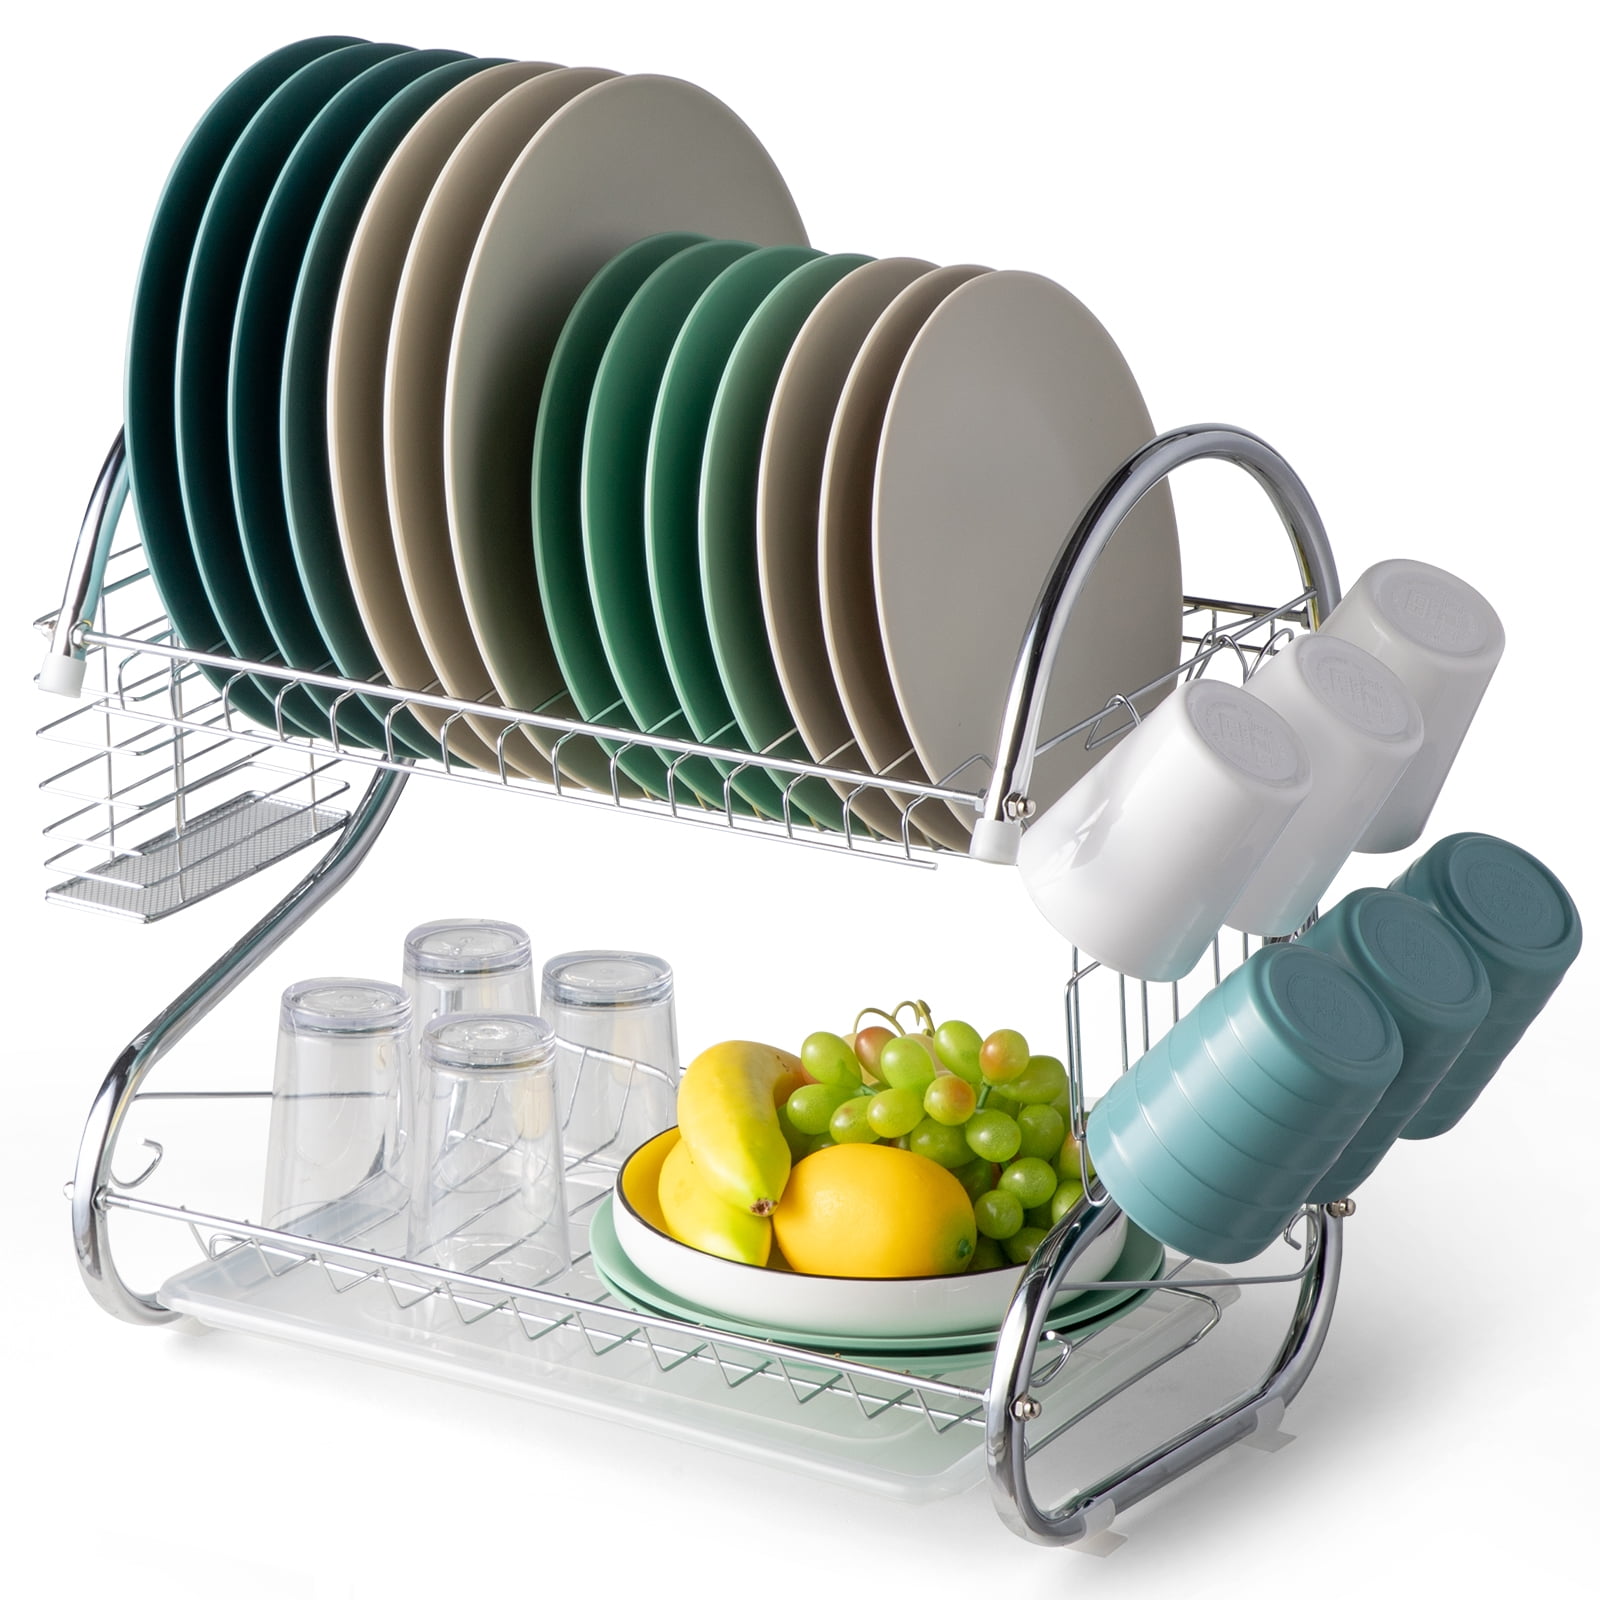 2 Tier Dish Drying Rack Drainer Stainless Steel Kitchen Cutlery Holder -  Bed Bath & Beyond - 35893028